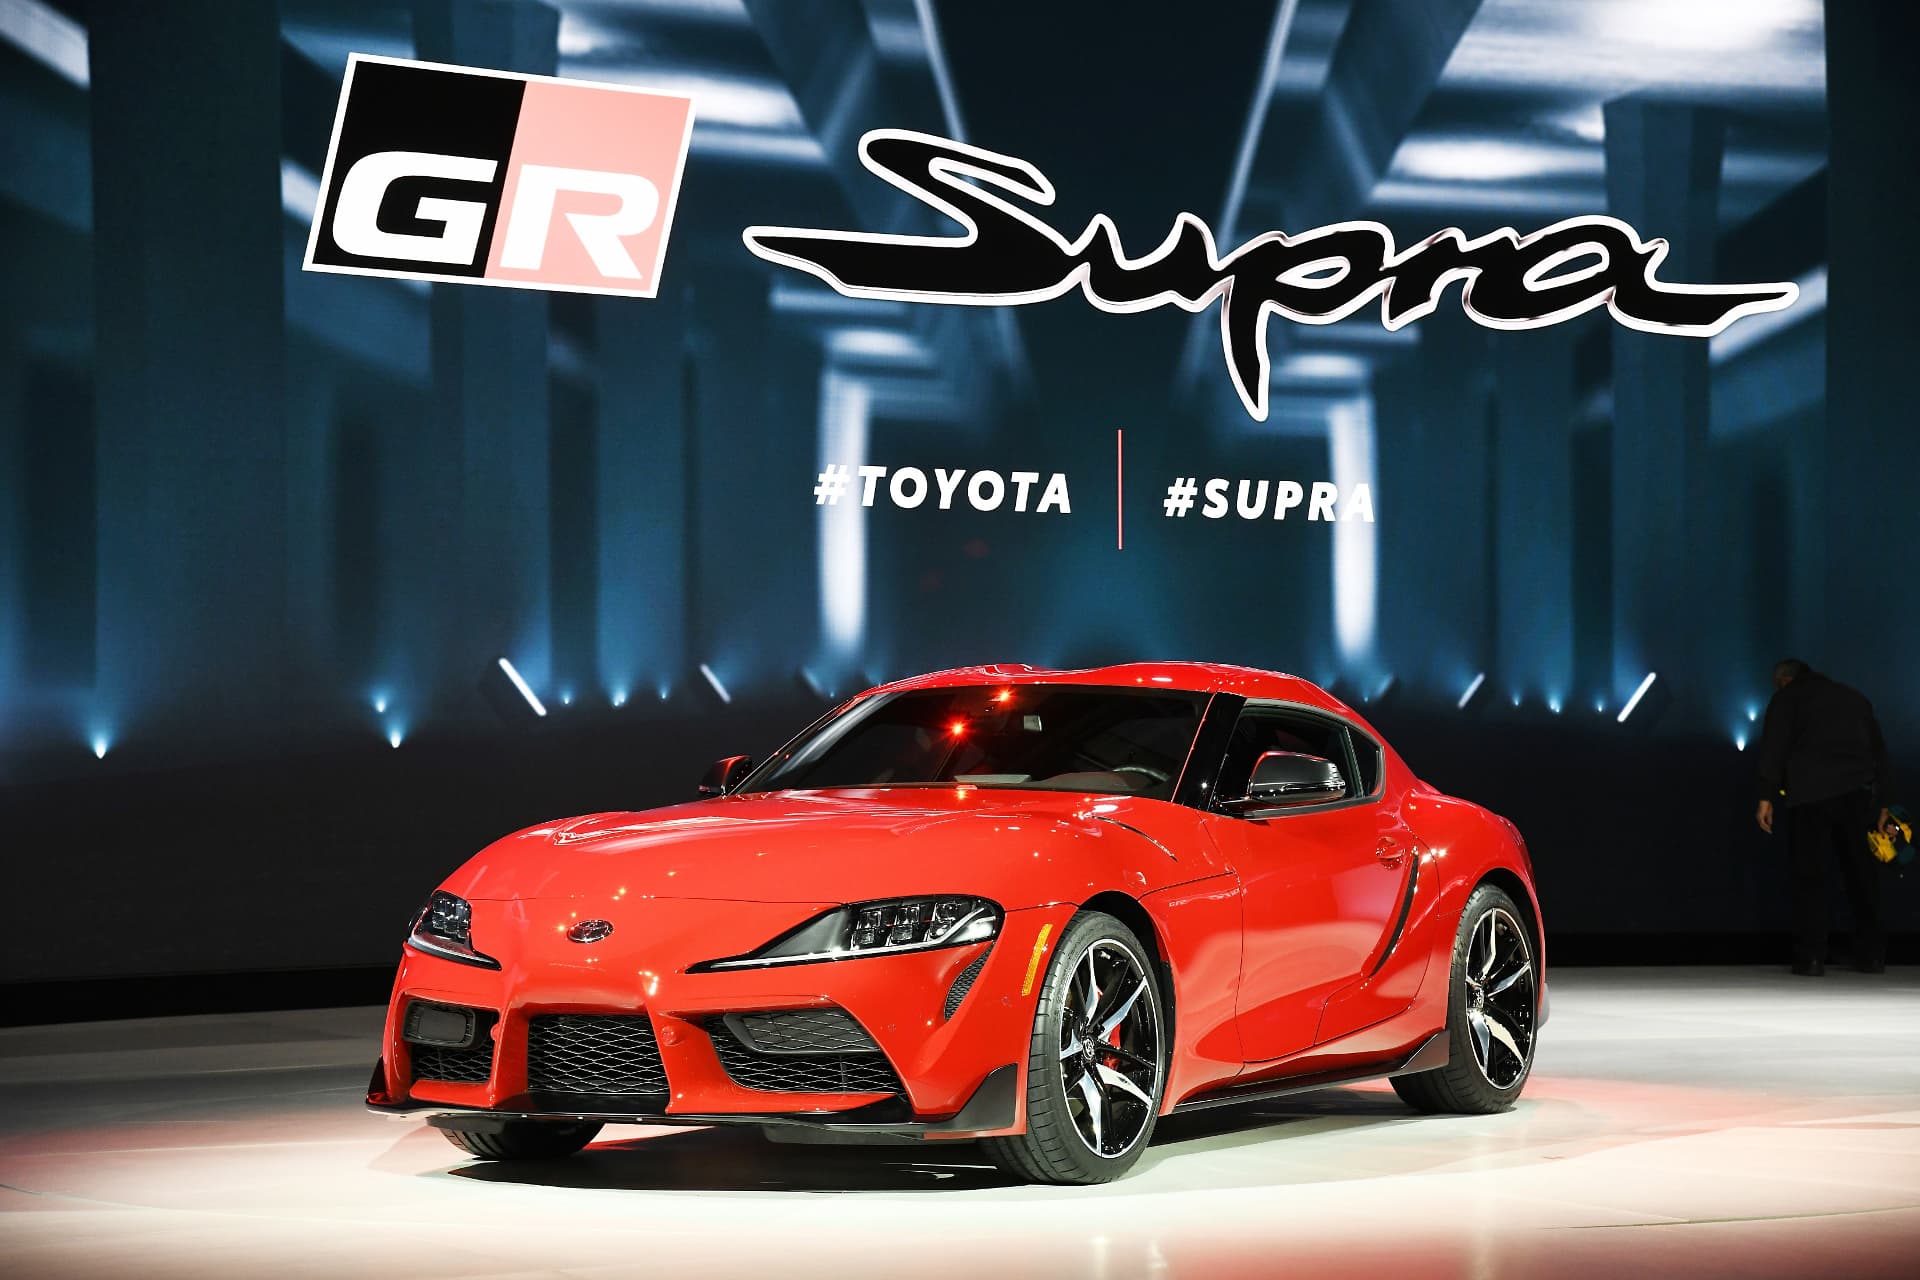 The 2020 Toyota Supra Is Proof Acceleration Costs $73,525 Per Second